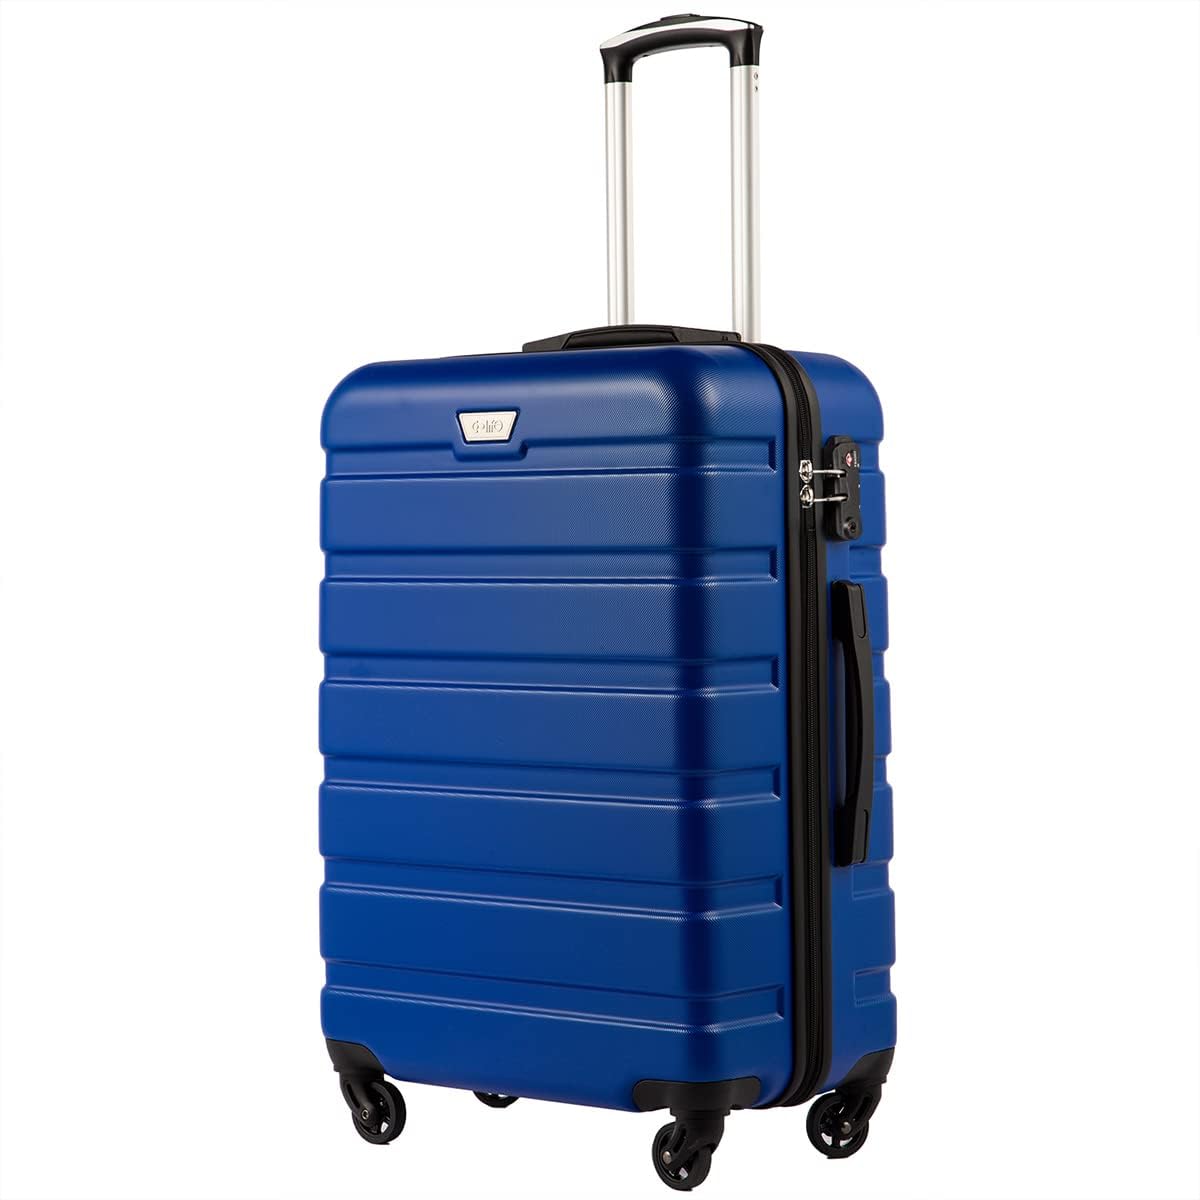 COOLIFE Suitcase Trolley Carry On Hand Cabin Luggage Hard Shell Travel Bag Lightweight with TSA Lock and 2 Year Warranty Durable 4 Spinner Wheels (Blue, L(28 inch))